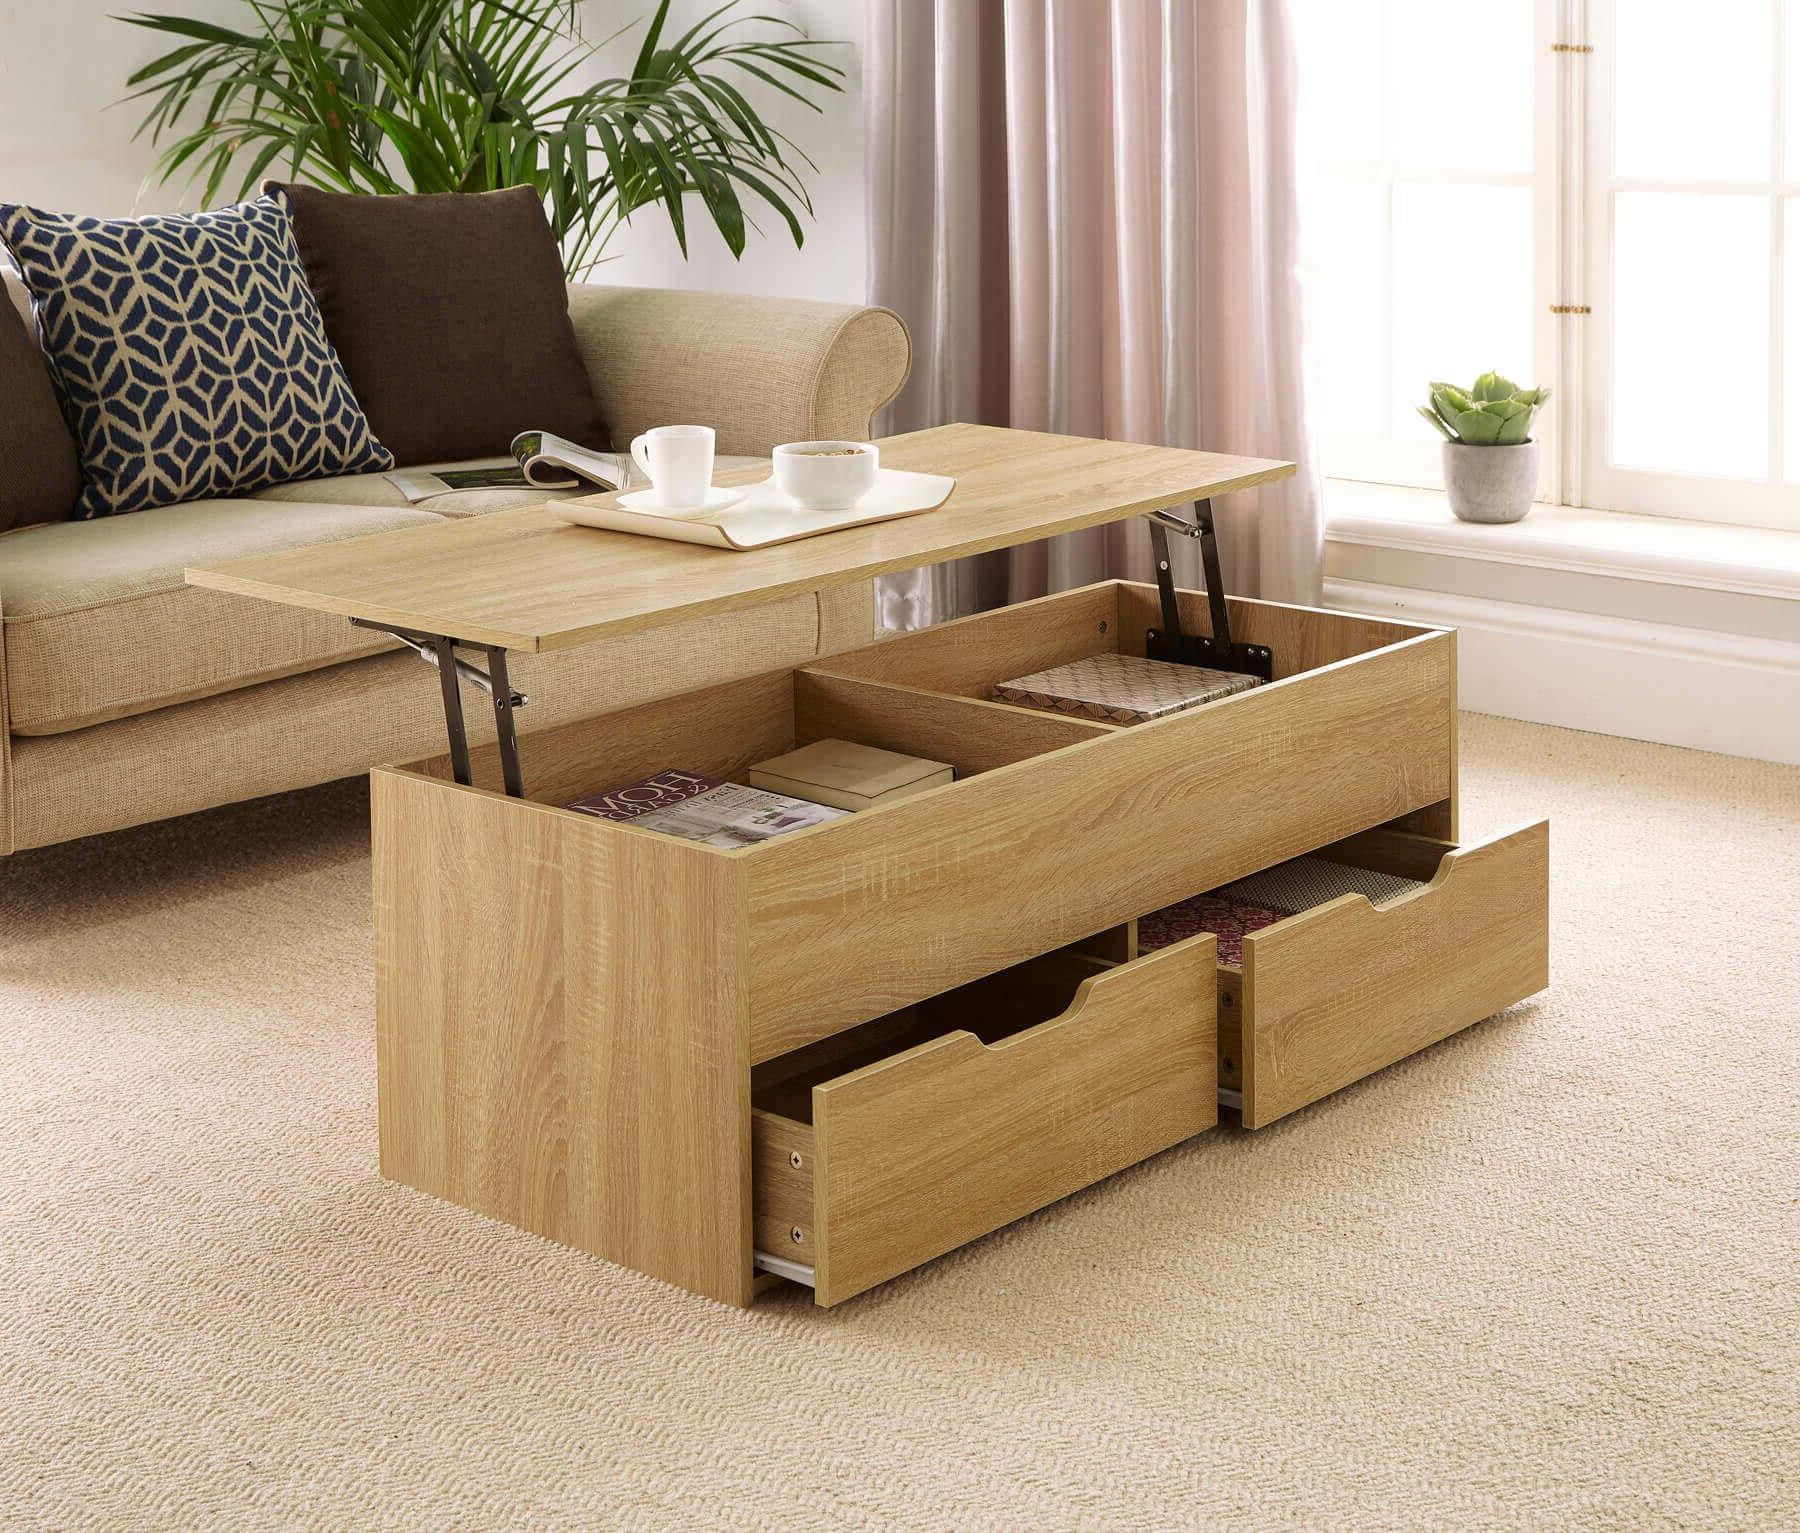 Oak Wooden Coffee Table With Lift Up Top And 2 Large Storage Drawers Intended For Most Current Lift Top Coffee Tables With Storage Drawers (View 4 of 15)